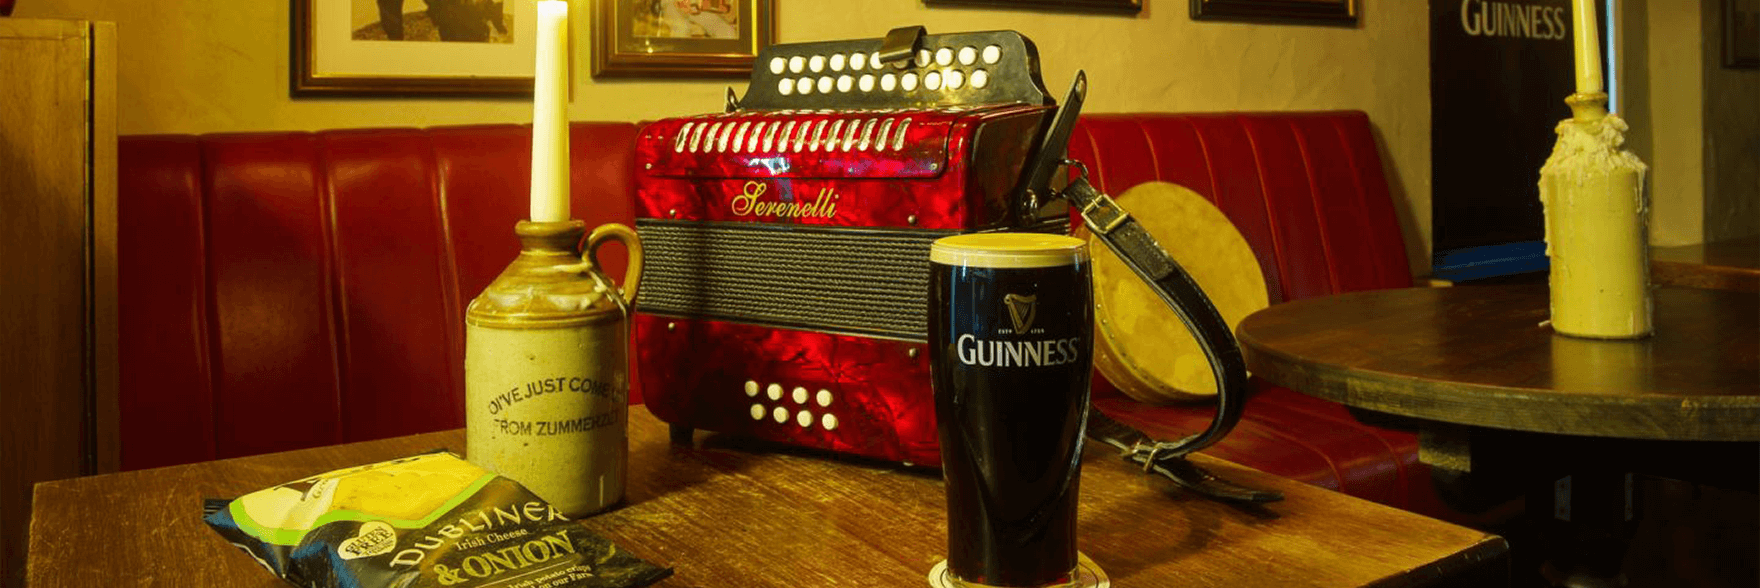 A pint of Guinness sitting on a table in an old Irish pub surrounded by a candle, crisps and an old instrument 